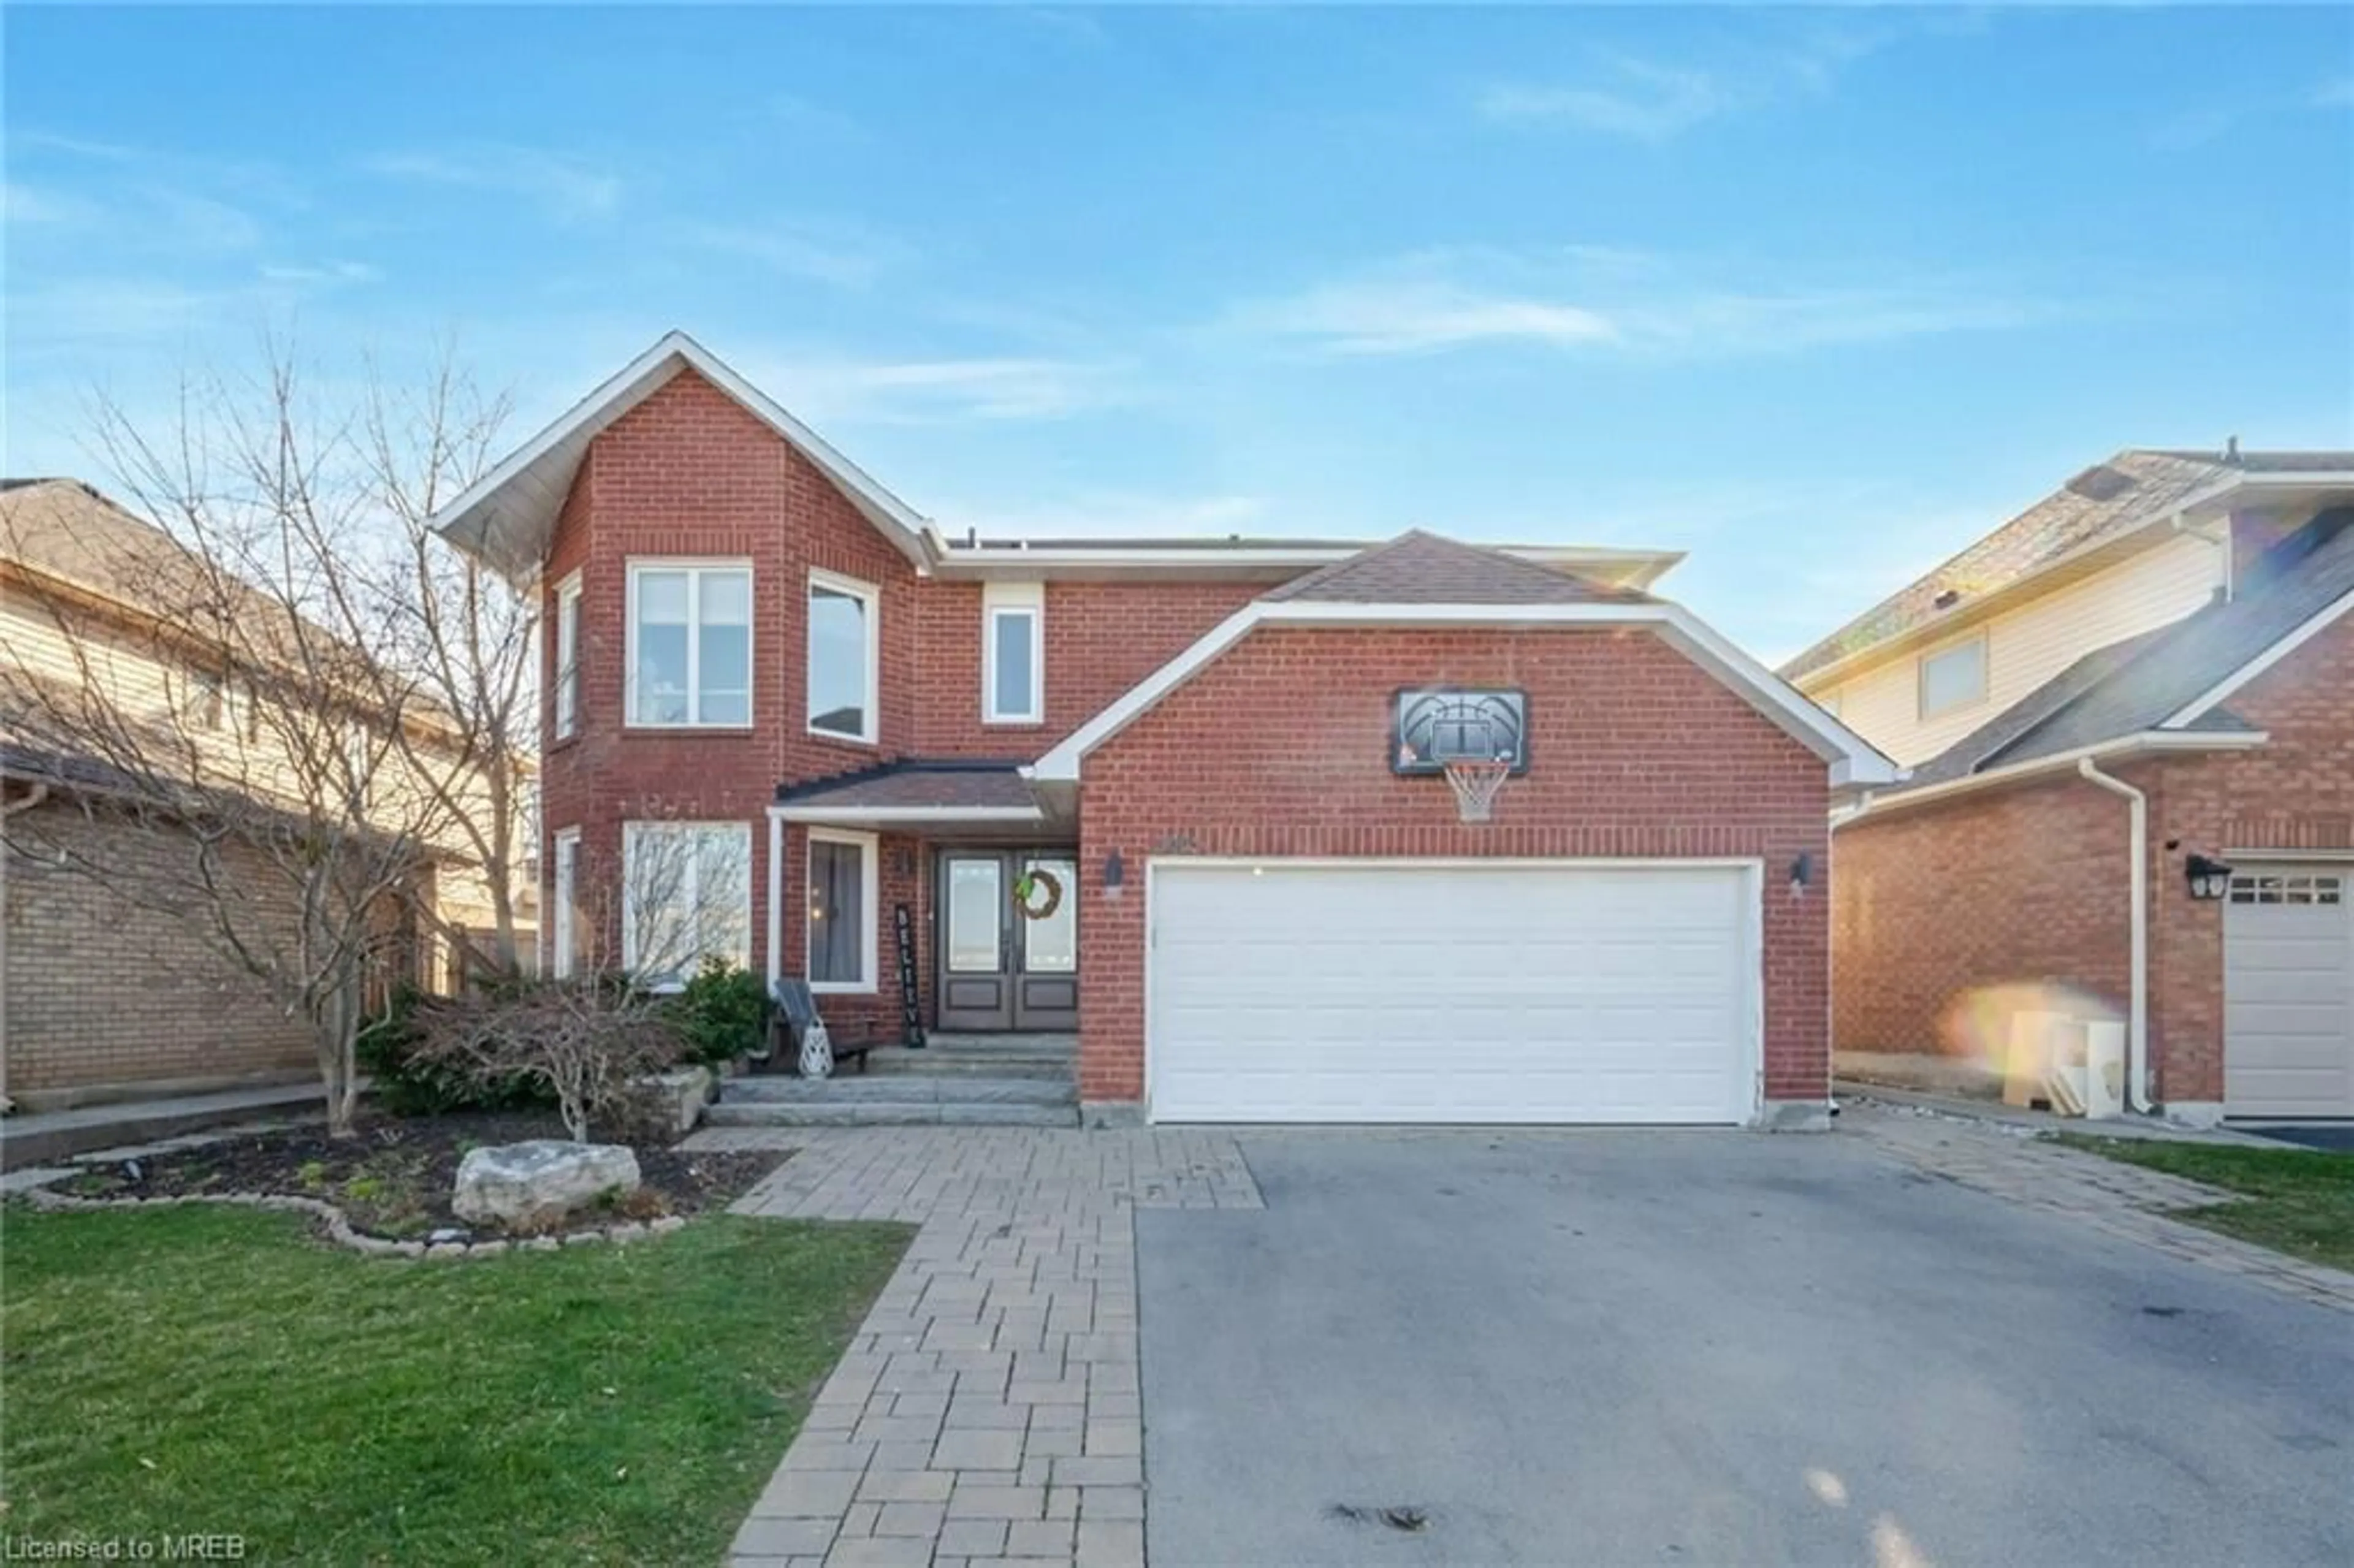 Home with brick exterior material for 3005 Headon Forest Dr, Burlington Ontario L7M 3Y2